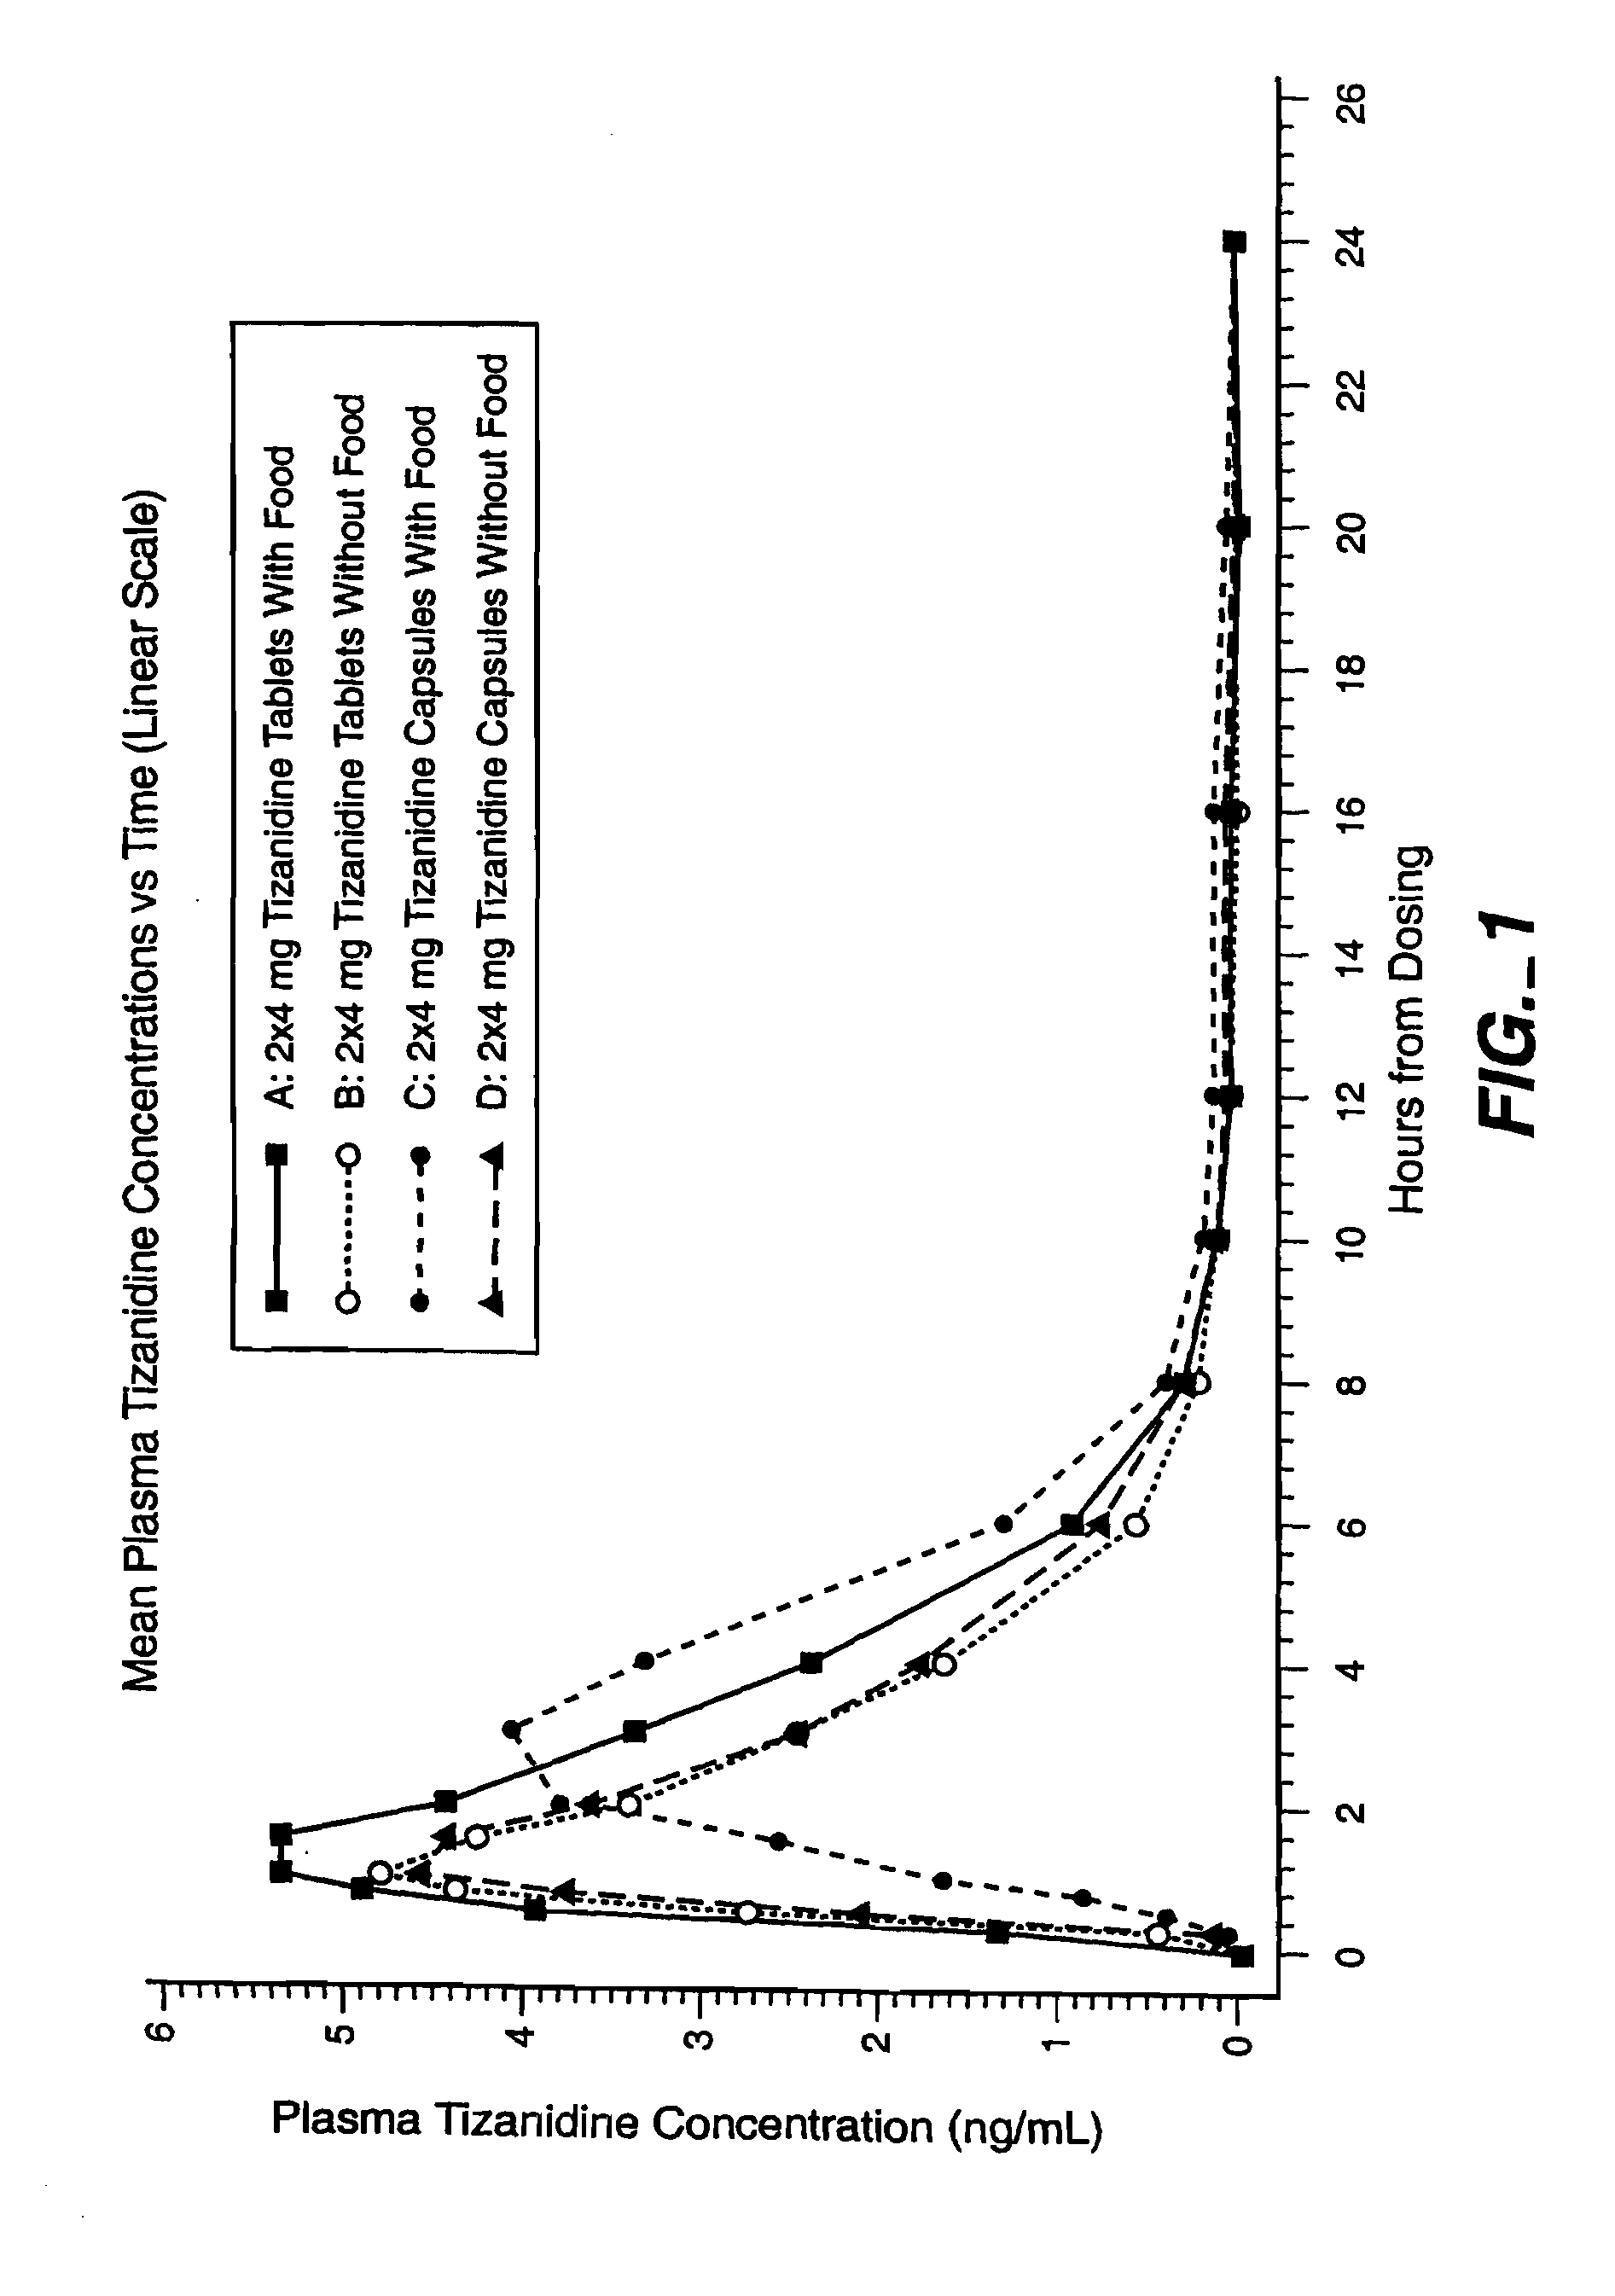 Method of reducing somnolence in patients treated with tizanidine